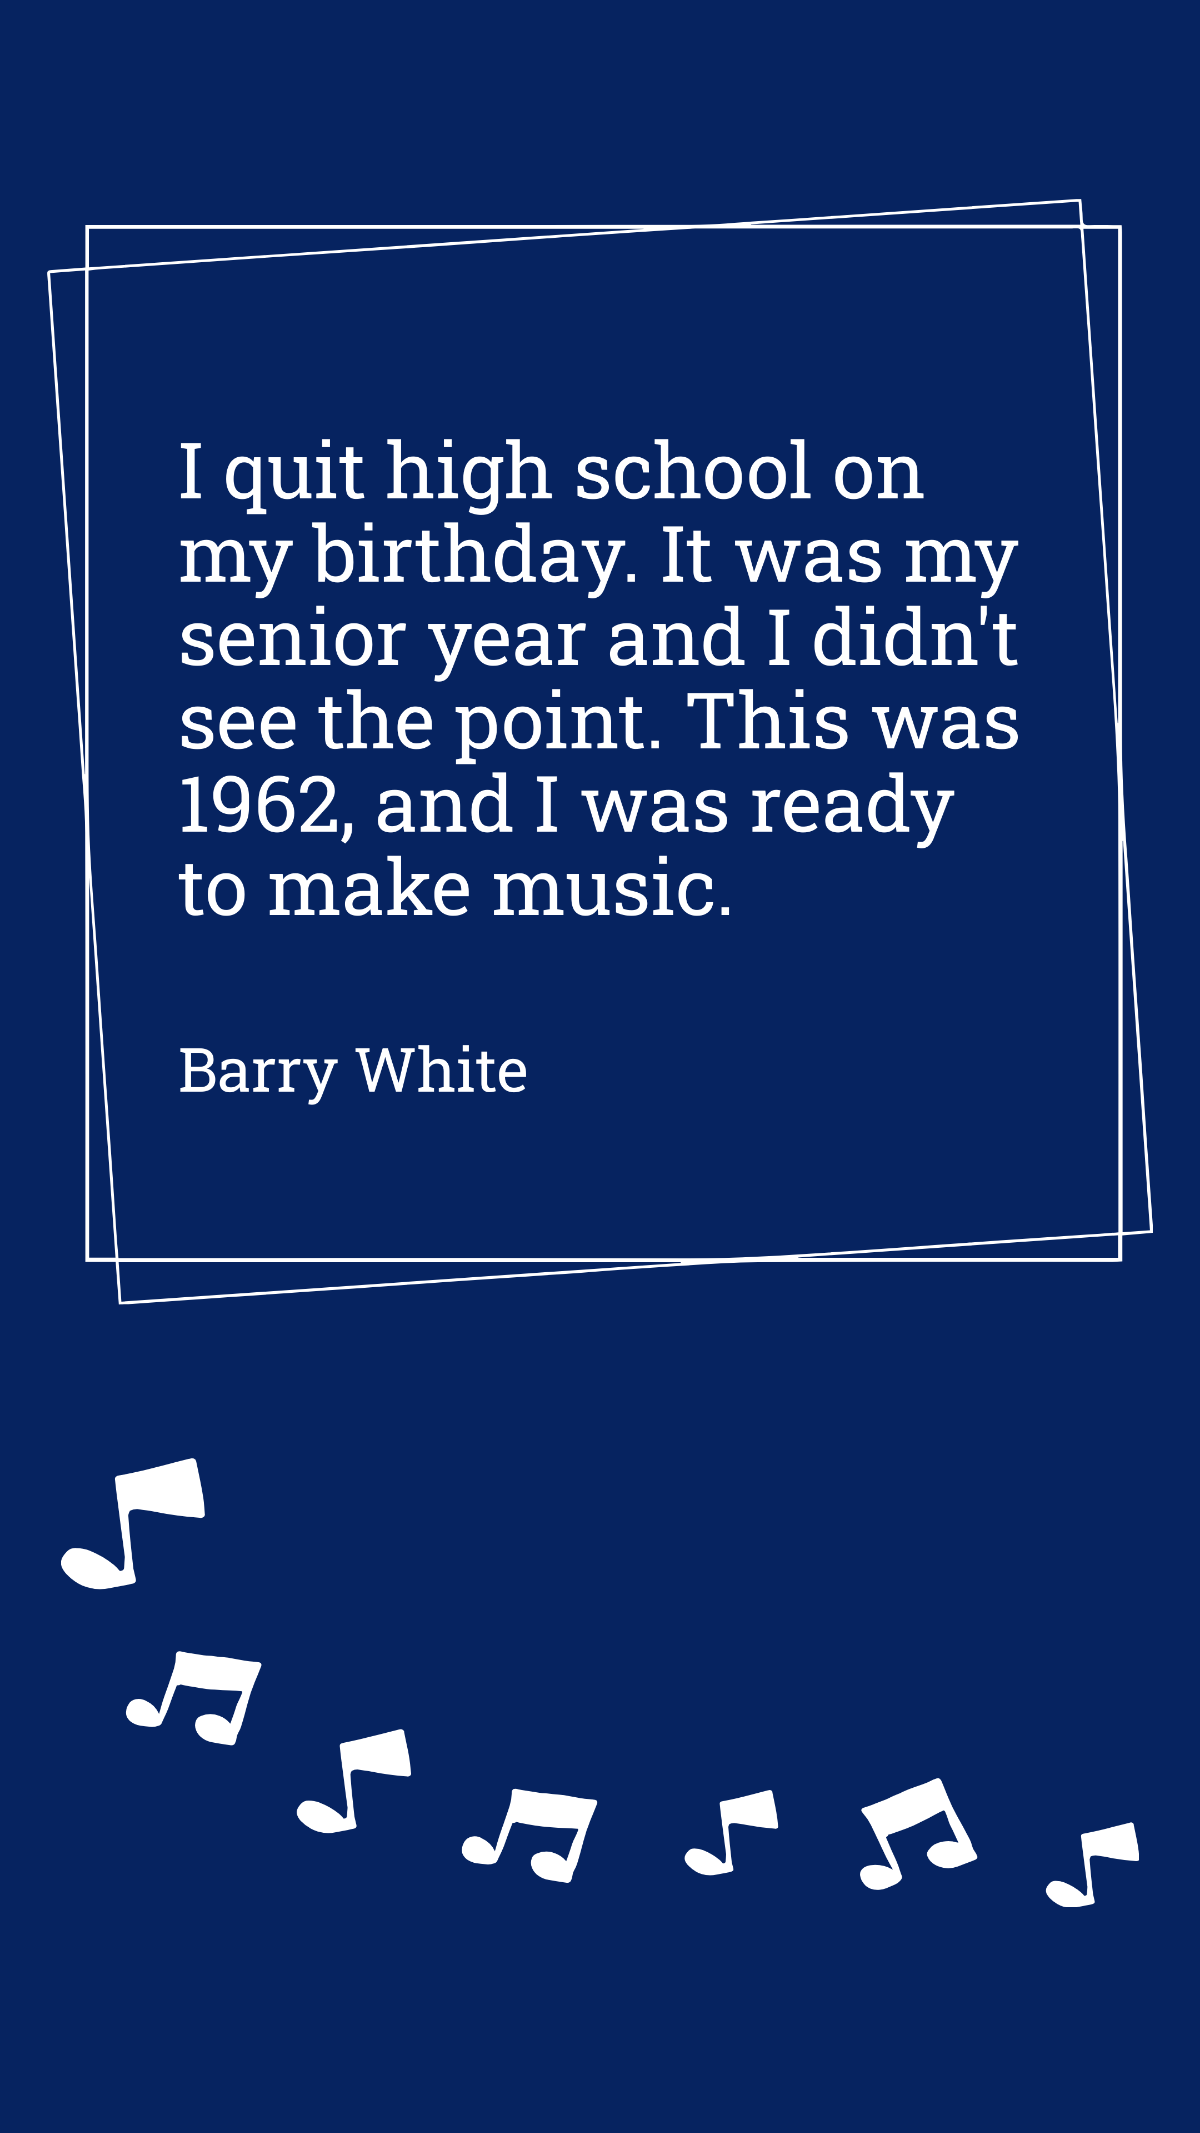 Barry White - I quit high school on my birthday. It was my senior year and I didn't see the point. This was 1962, and I was ready to make music.